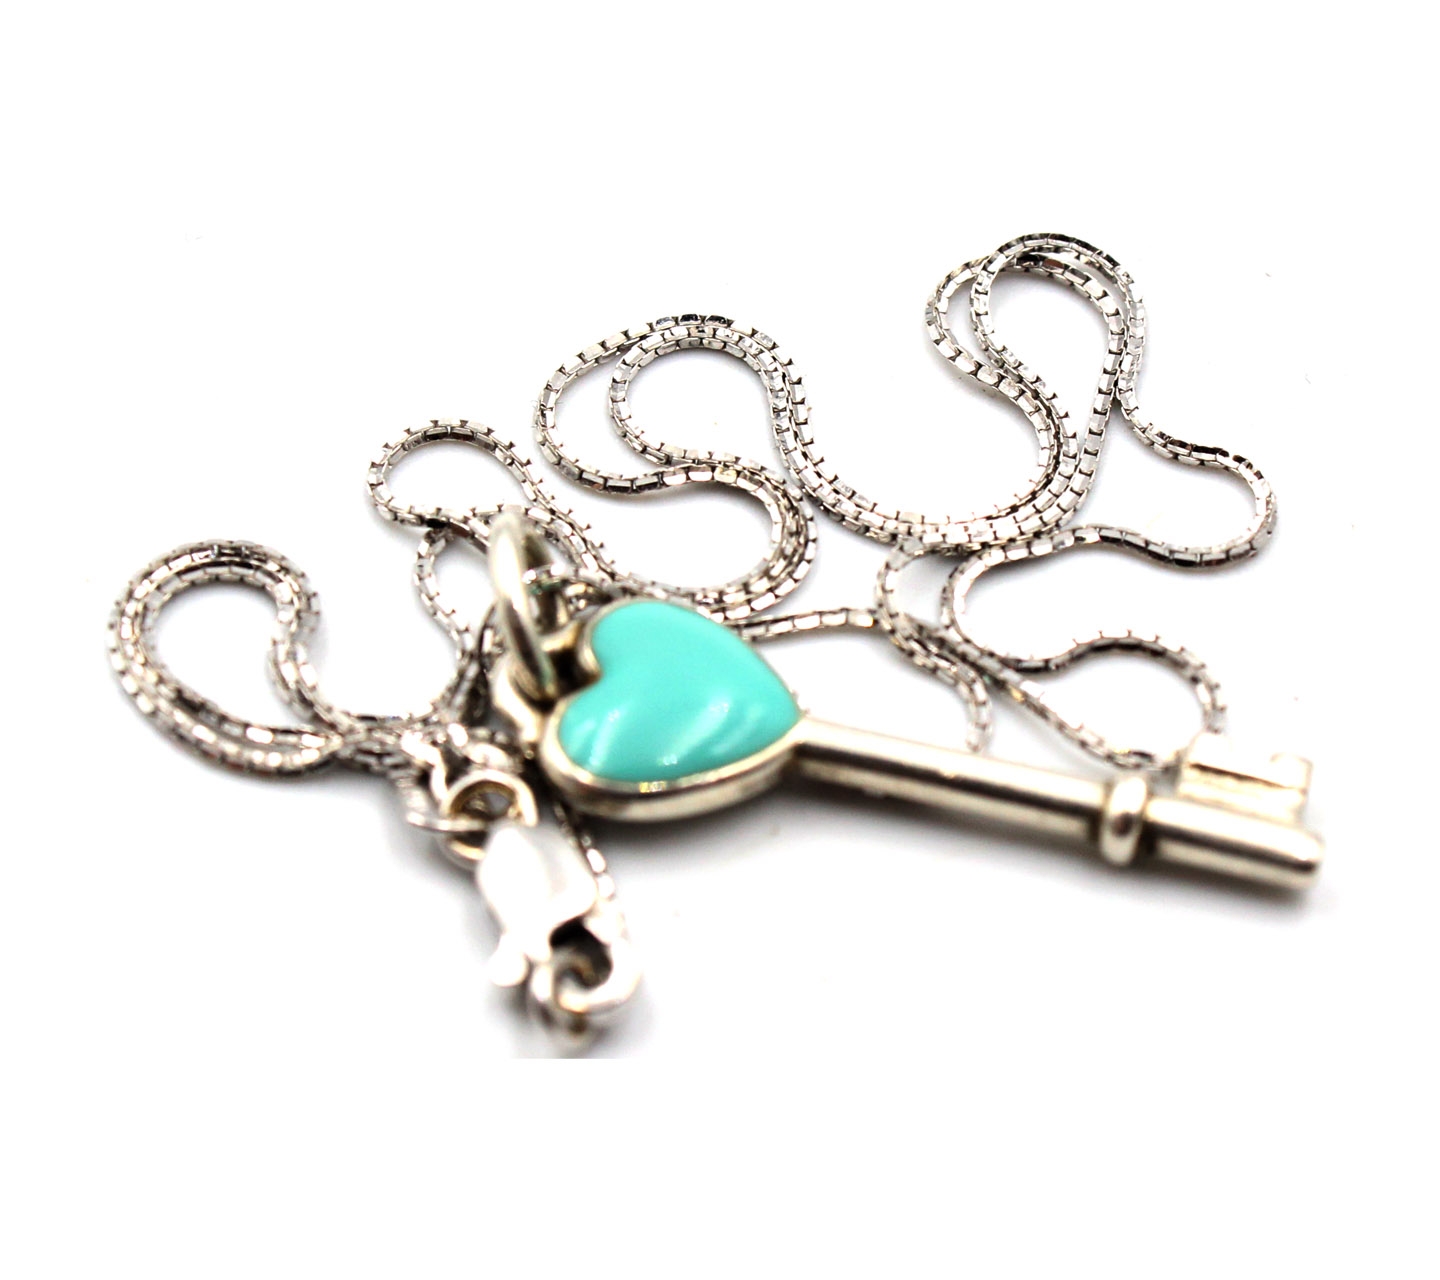 Tiffany & Co. Turquoise & Silver Love Key Necklaces